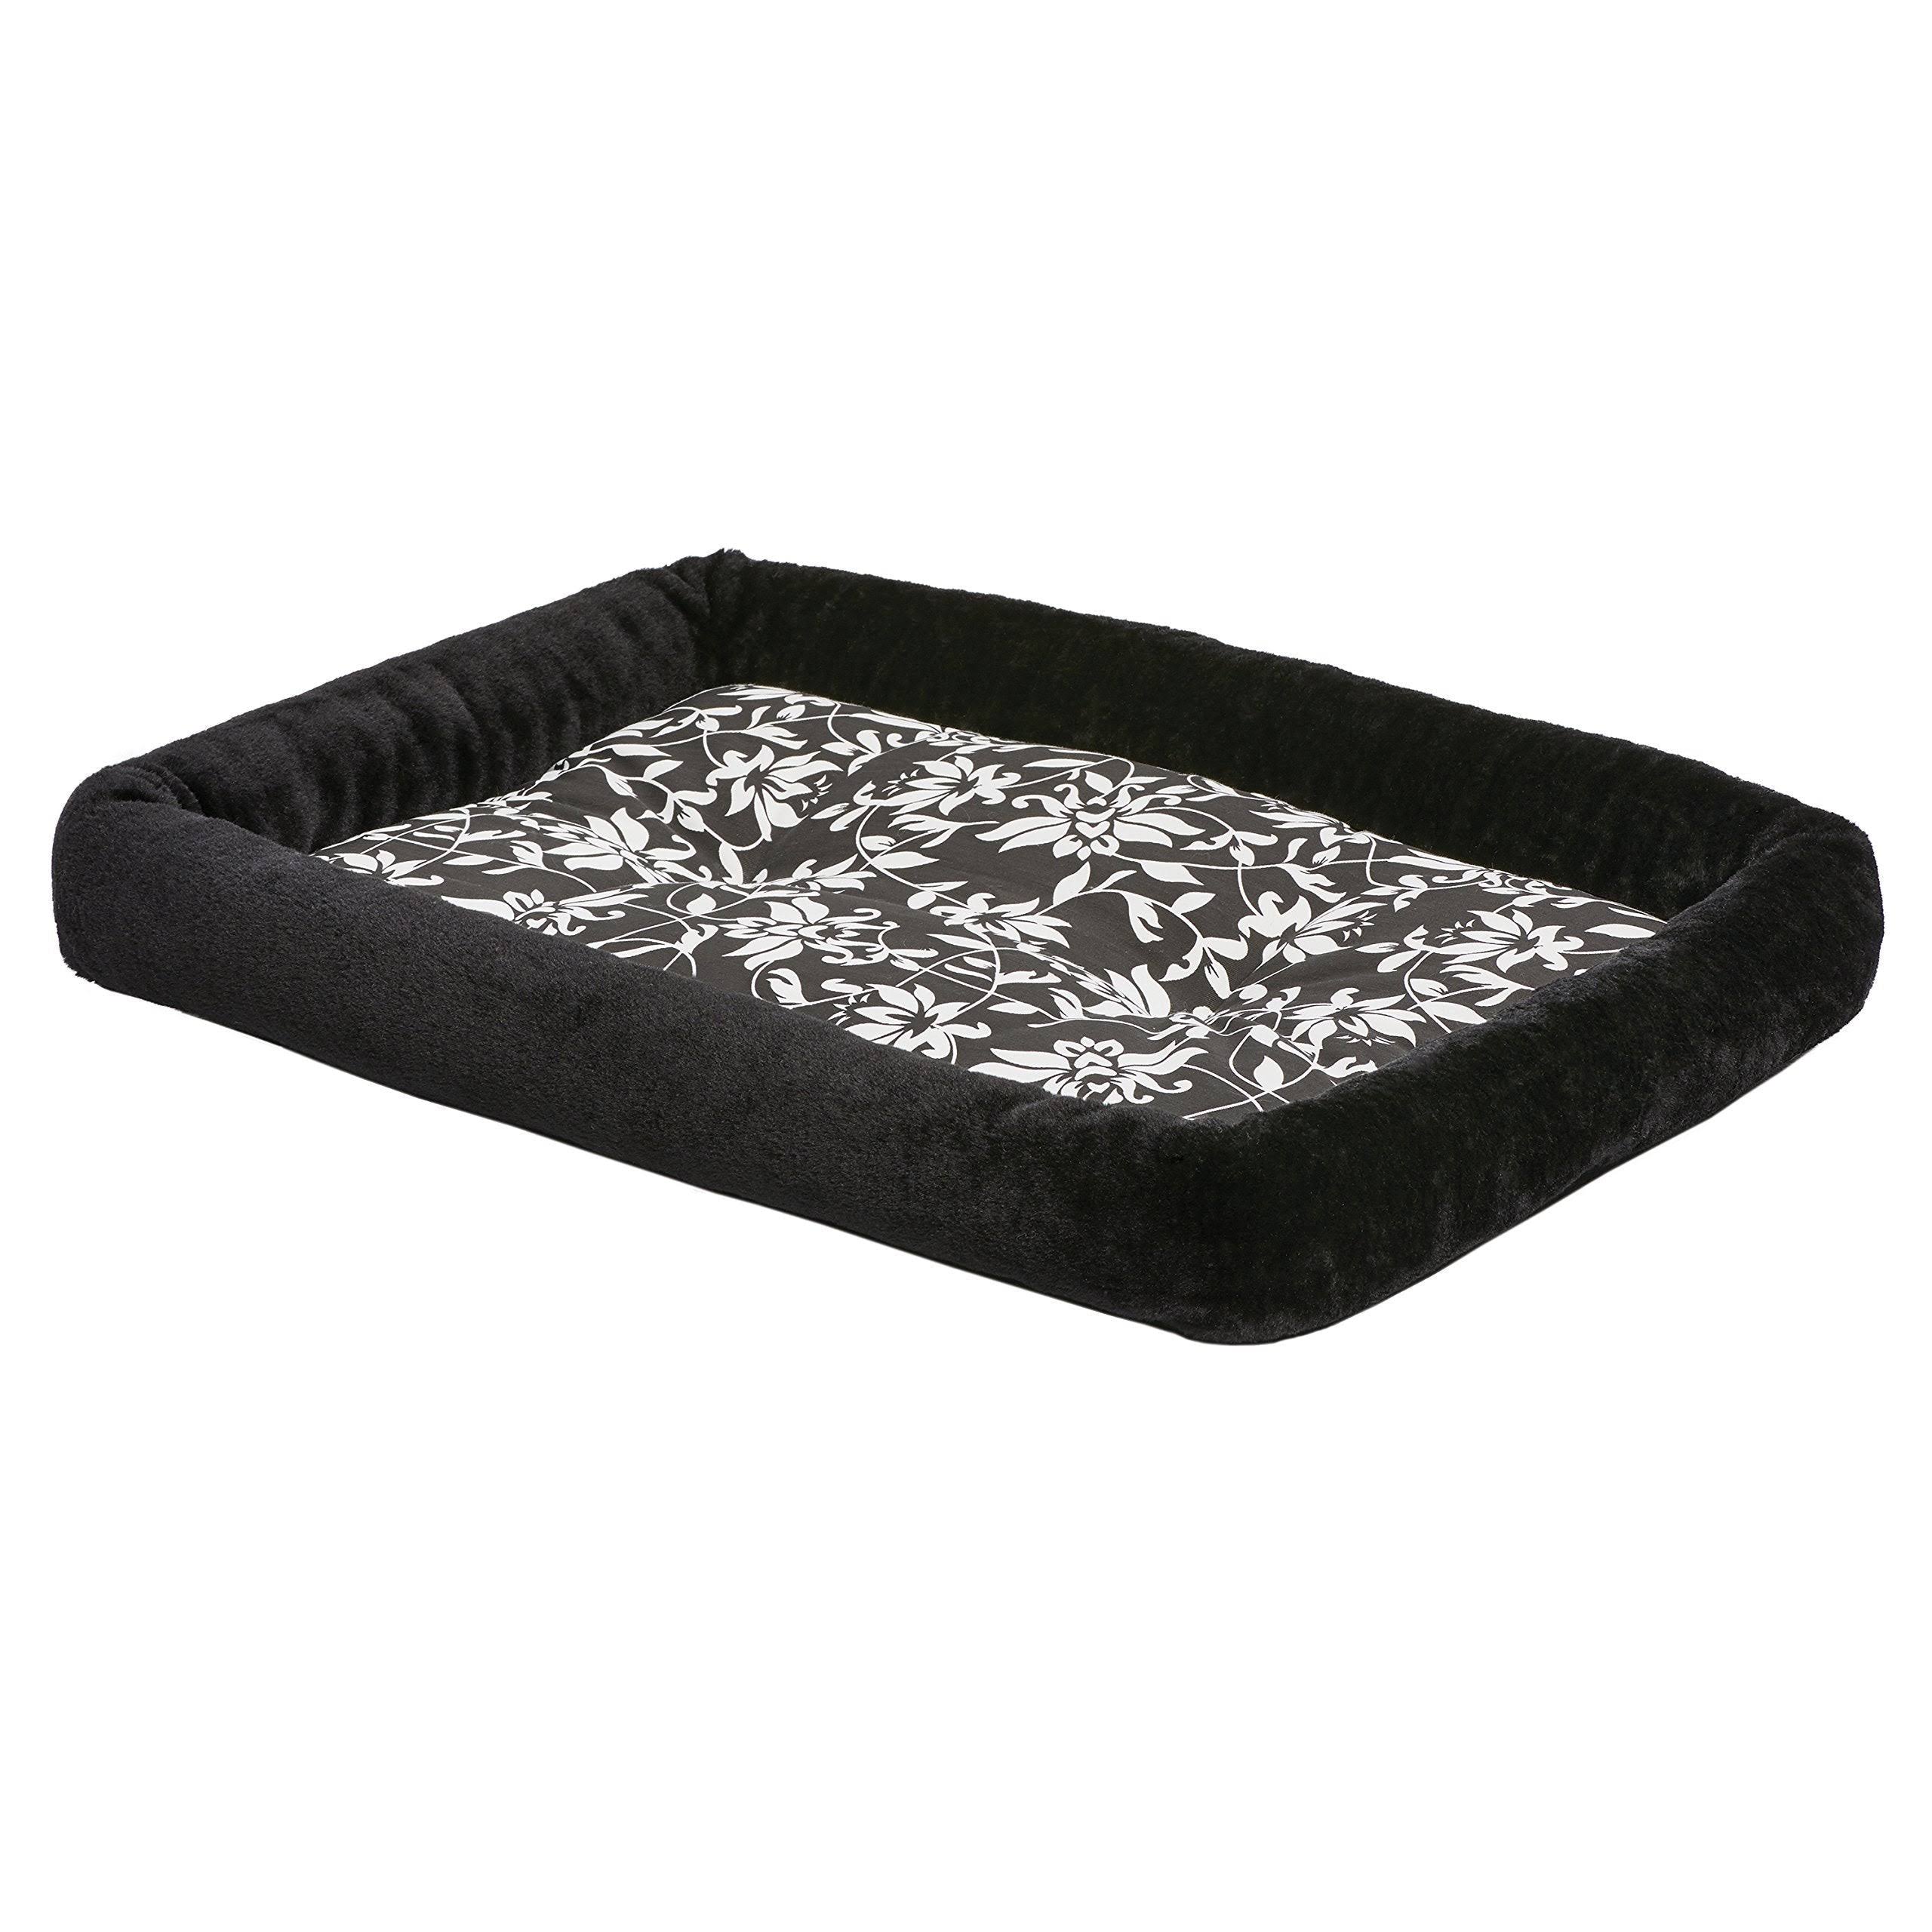 Midwest Homes for Pets QuietTime Couture Sofia Bolster Crate Pad | Best Price Guarantee | Free Shipping On All Orders | Delivery Guaranteed